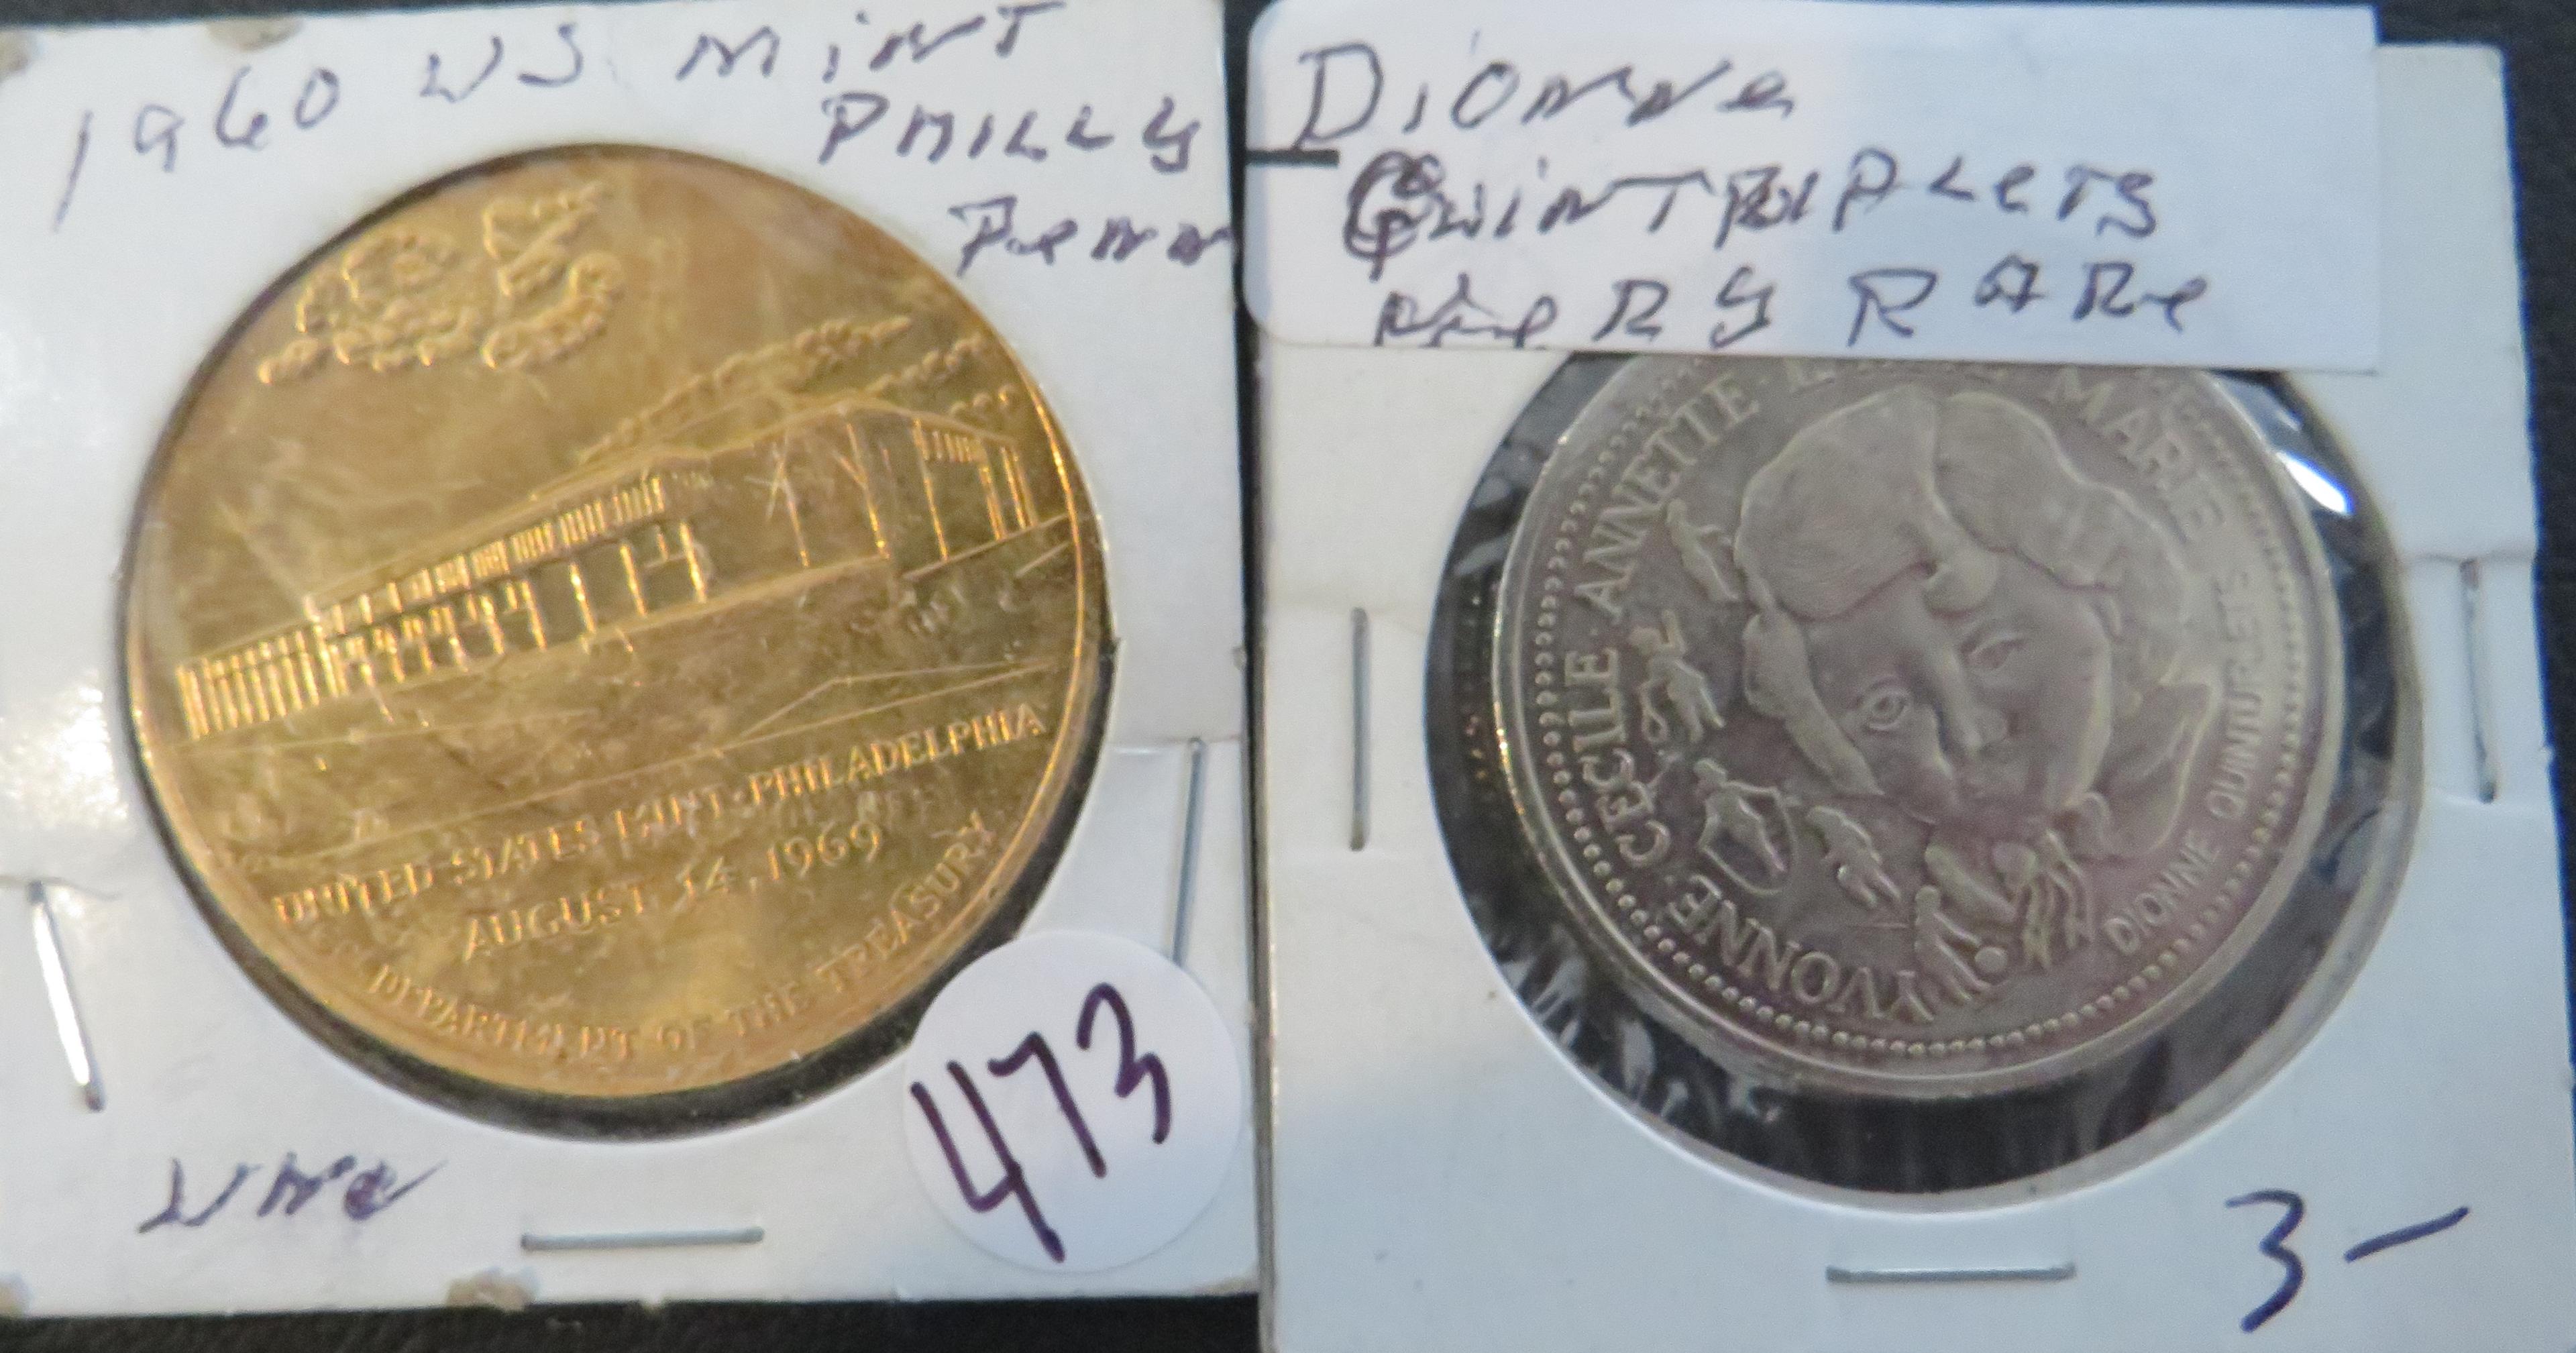 1960 US Mint Philly, Dionne Quintuplets Coin